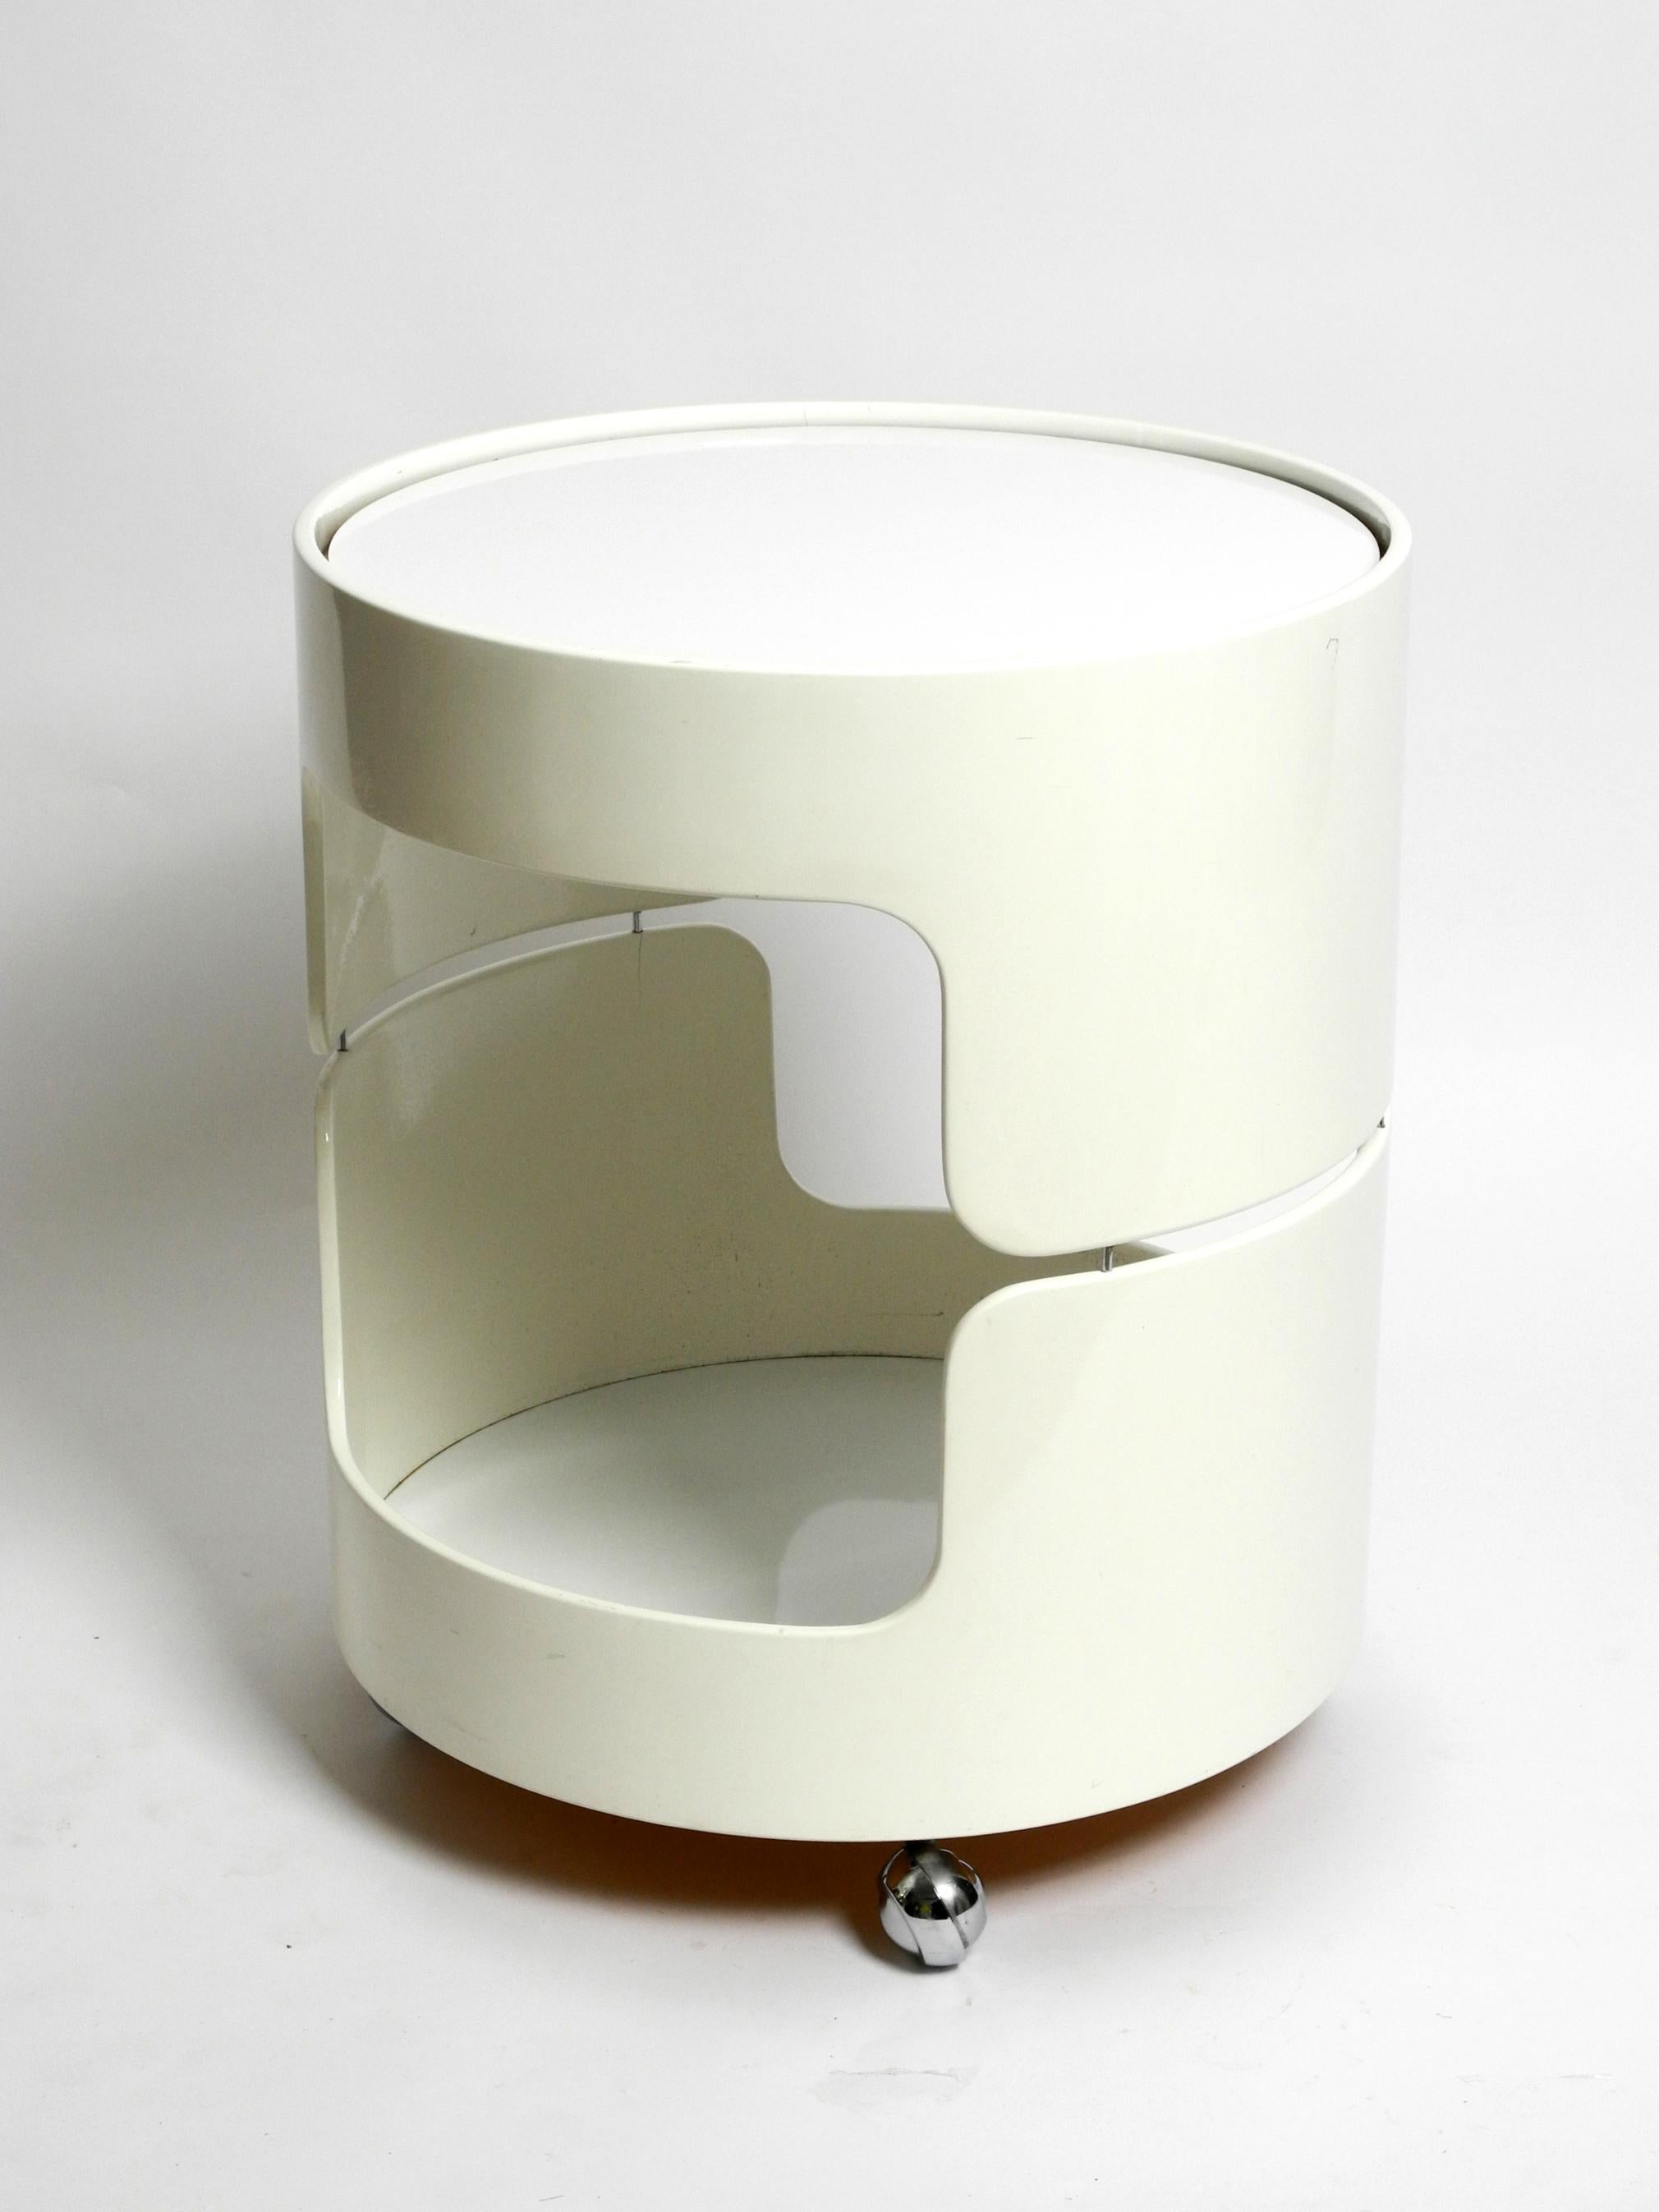 Beautiful Rare 1960s Beige White Side or Bar Table with Wheels Space Age Design For Sale 13